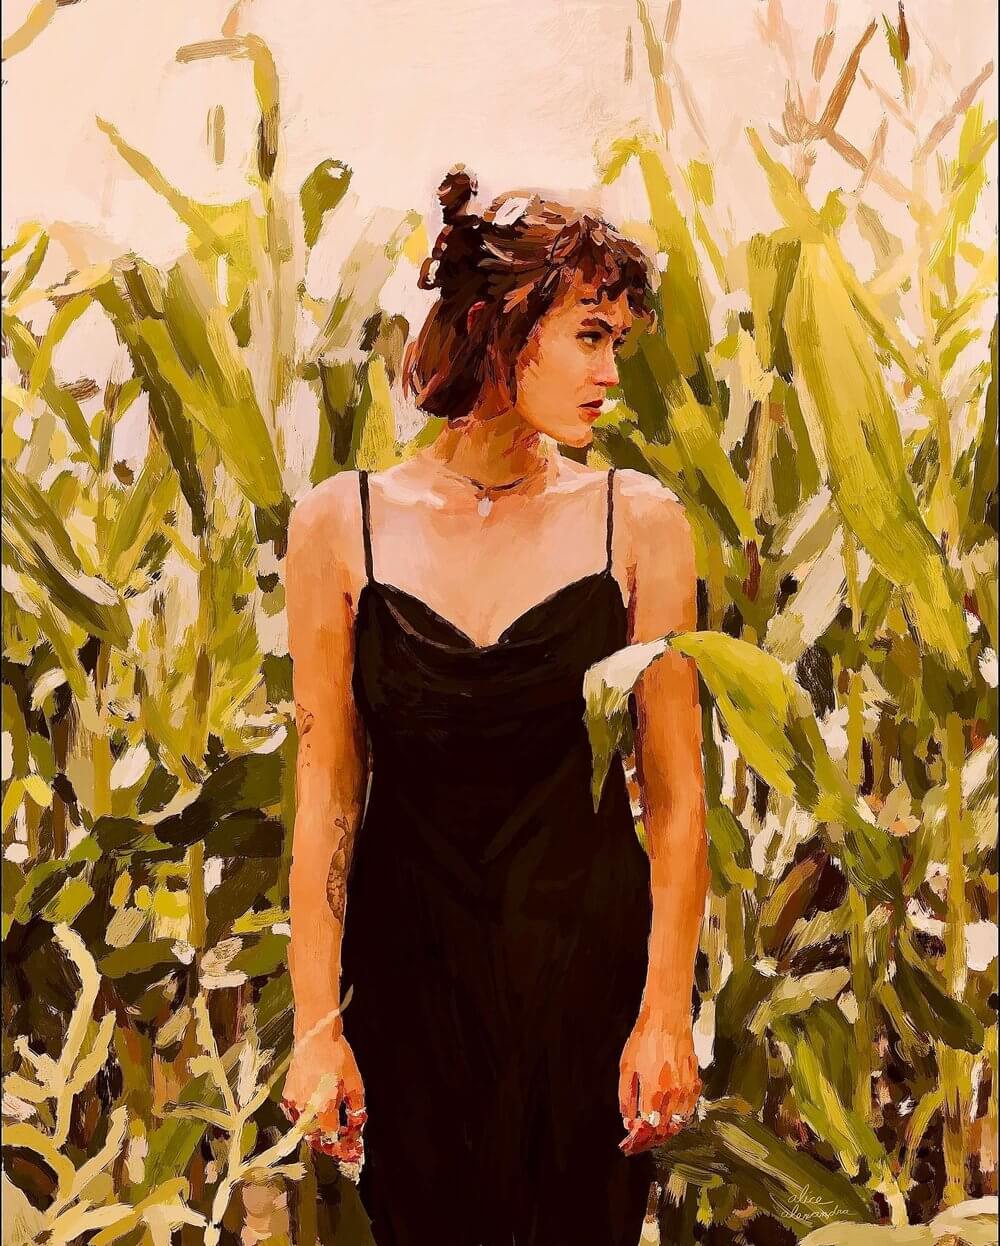 Painting of a woman in a cornfield.